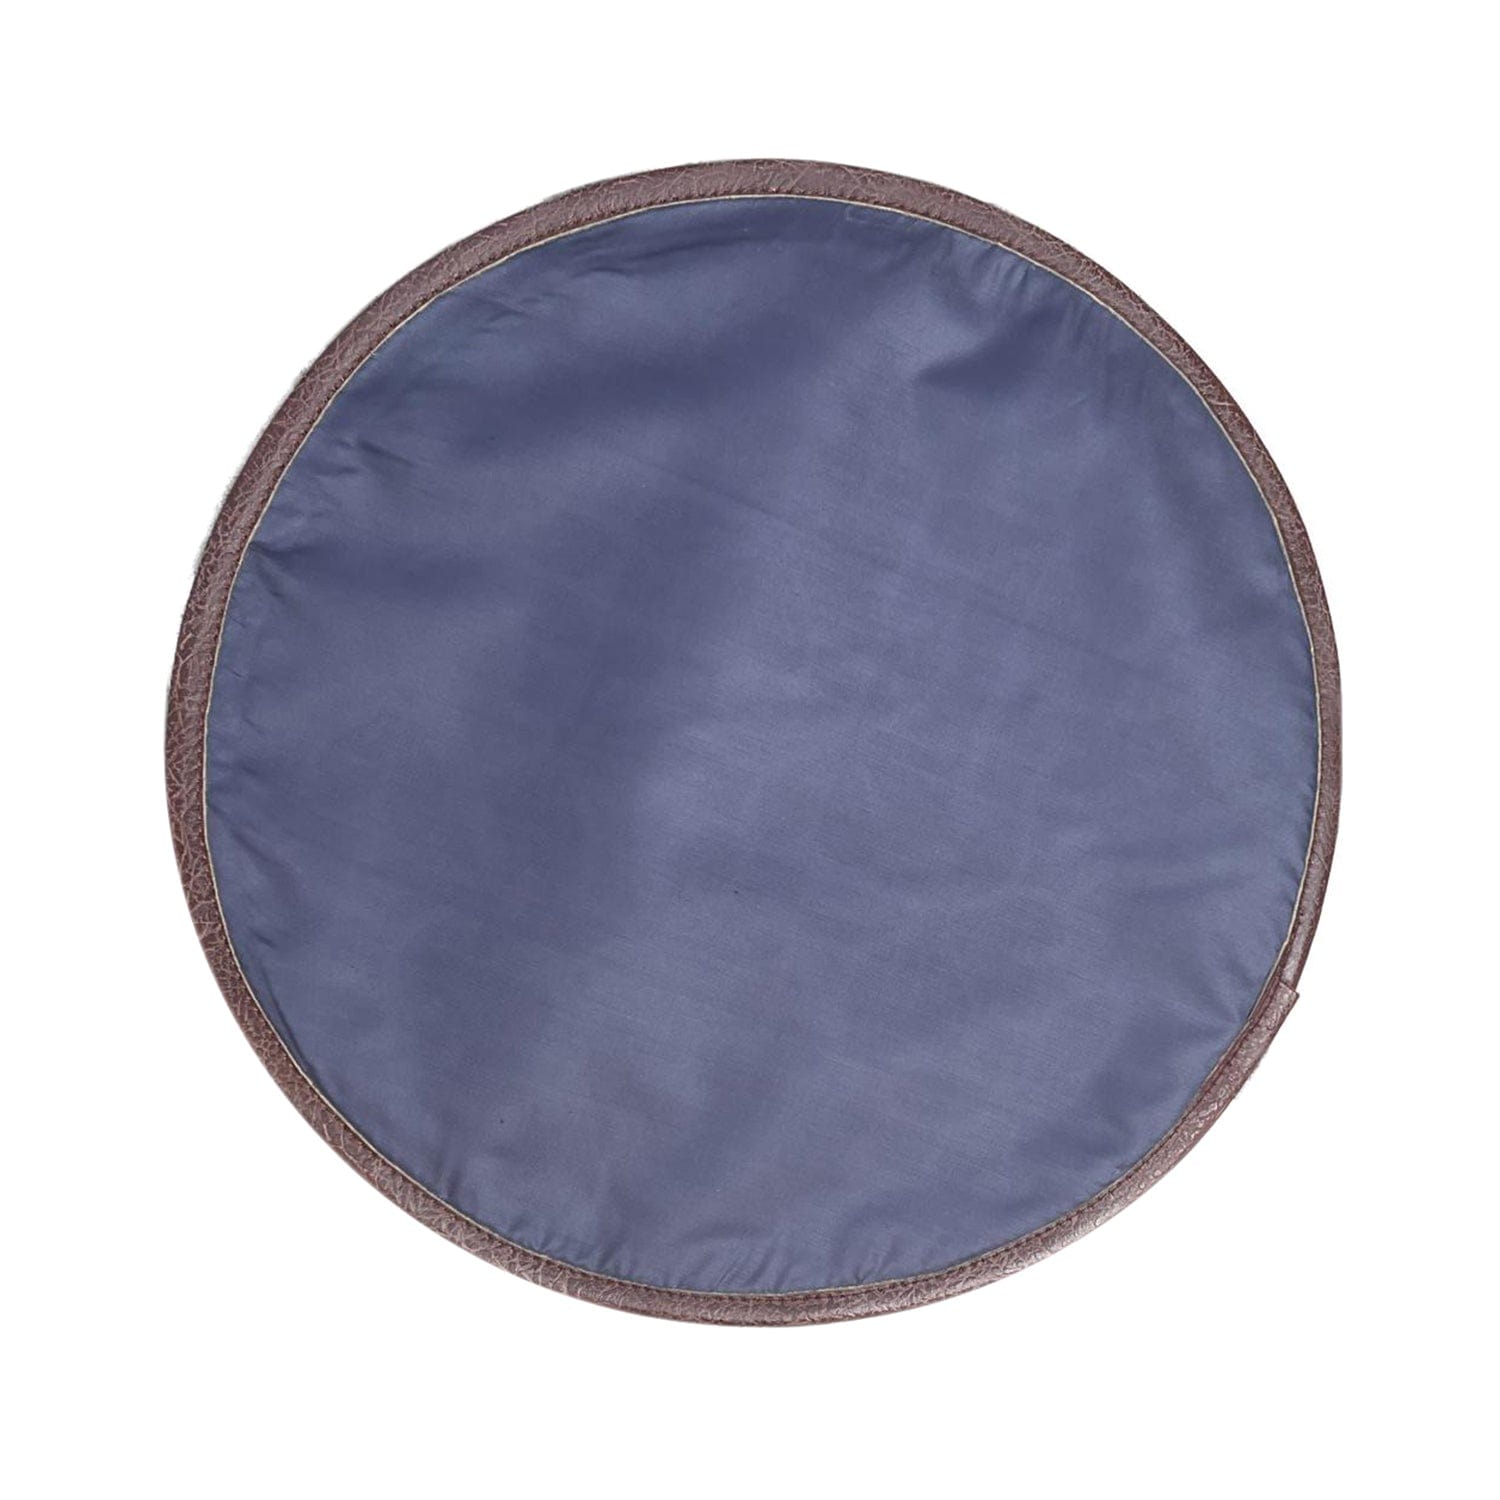 Mona B Set of 2 Printed Placemats, 13 INCH Round, Best for Bed-Side Table/Center Table, Dining Table/Shelves - PP-116 - Placemat by Mona-B - Shop1999, Shop2999, Shop3999